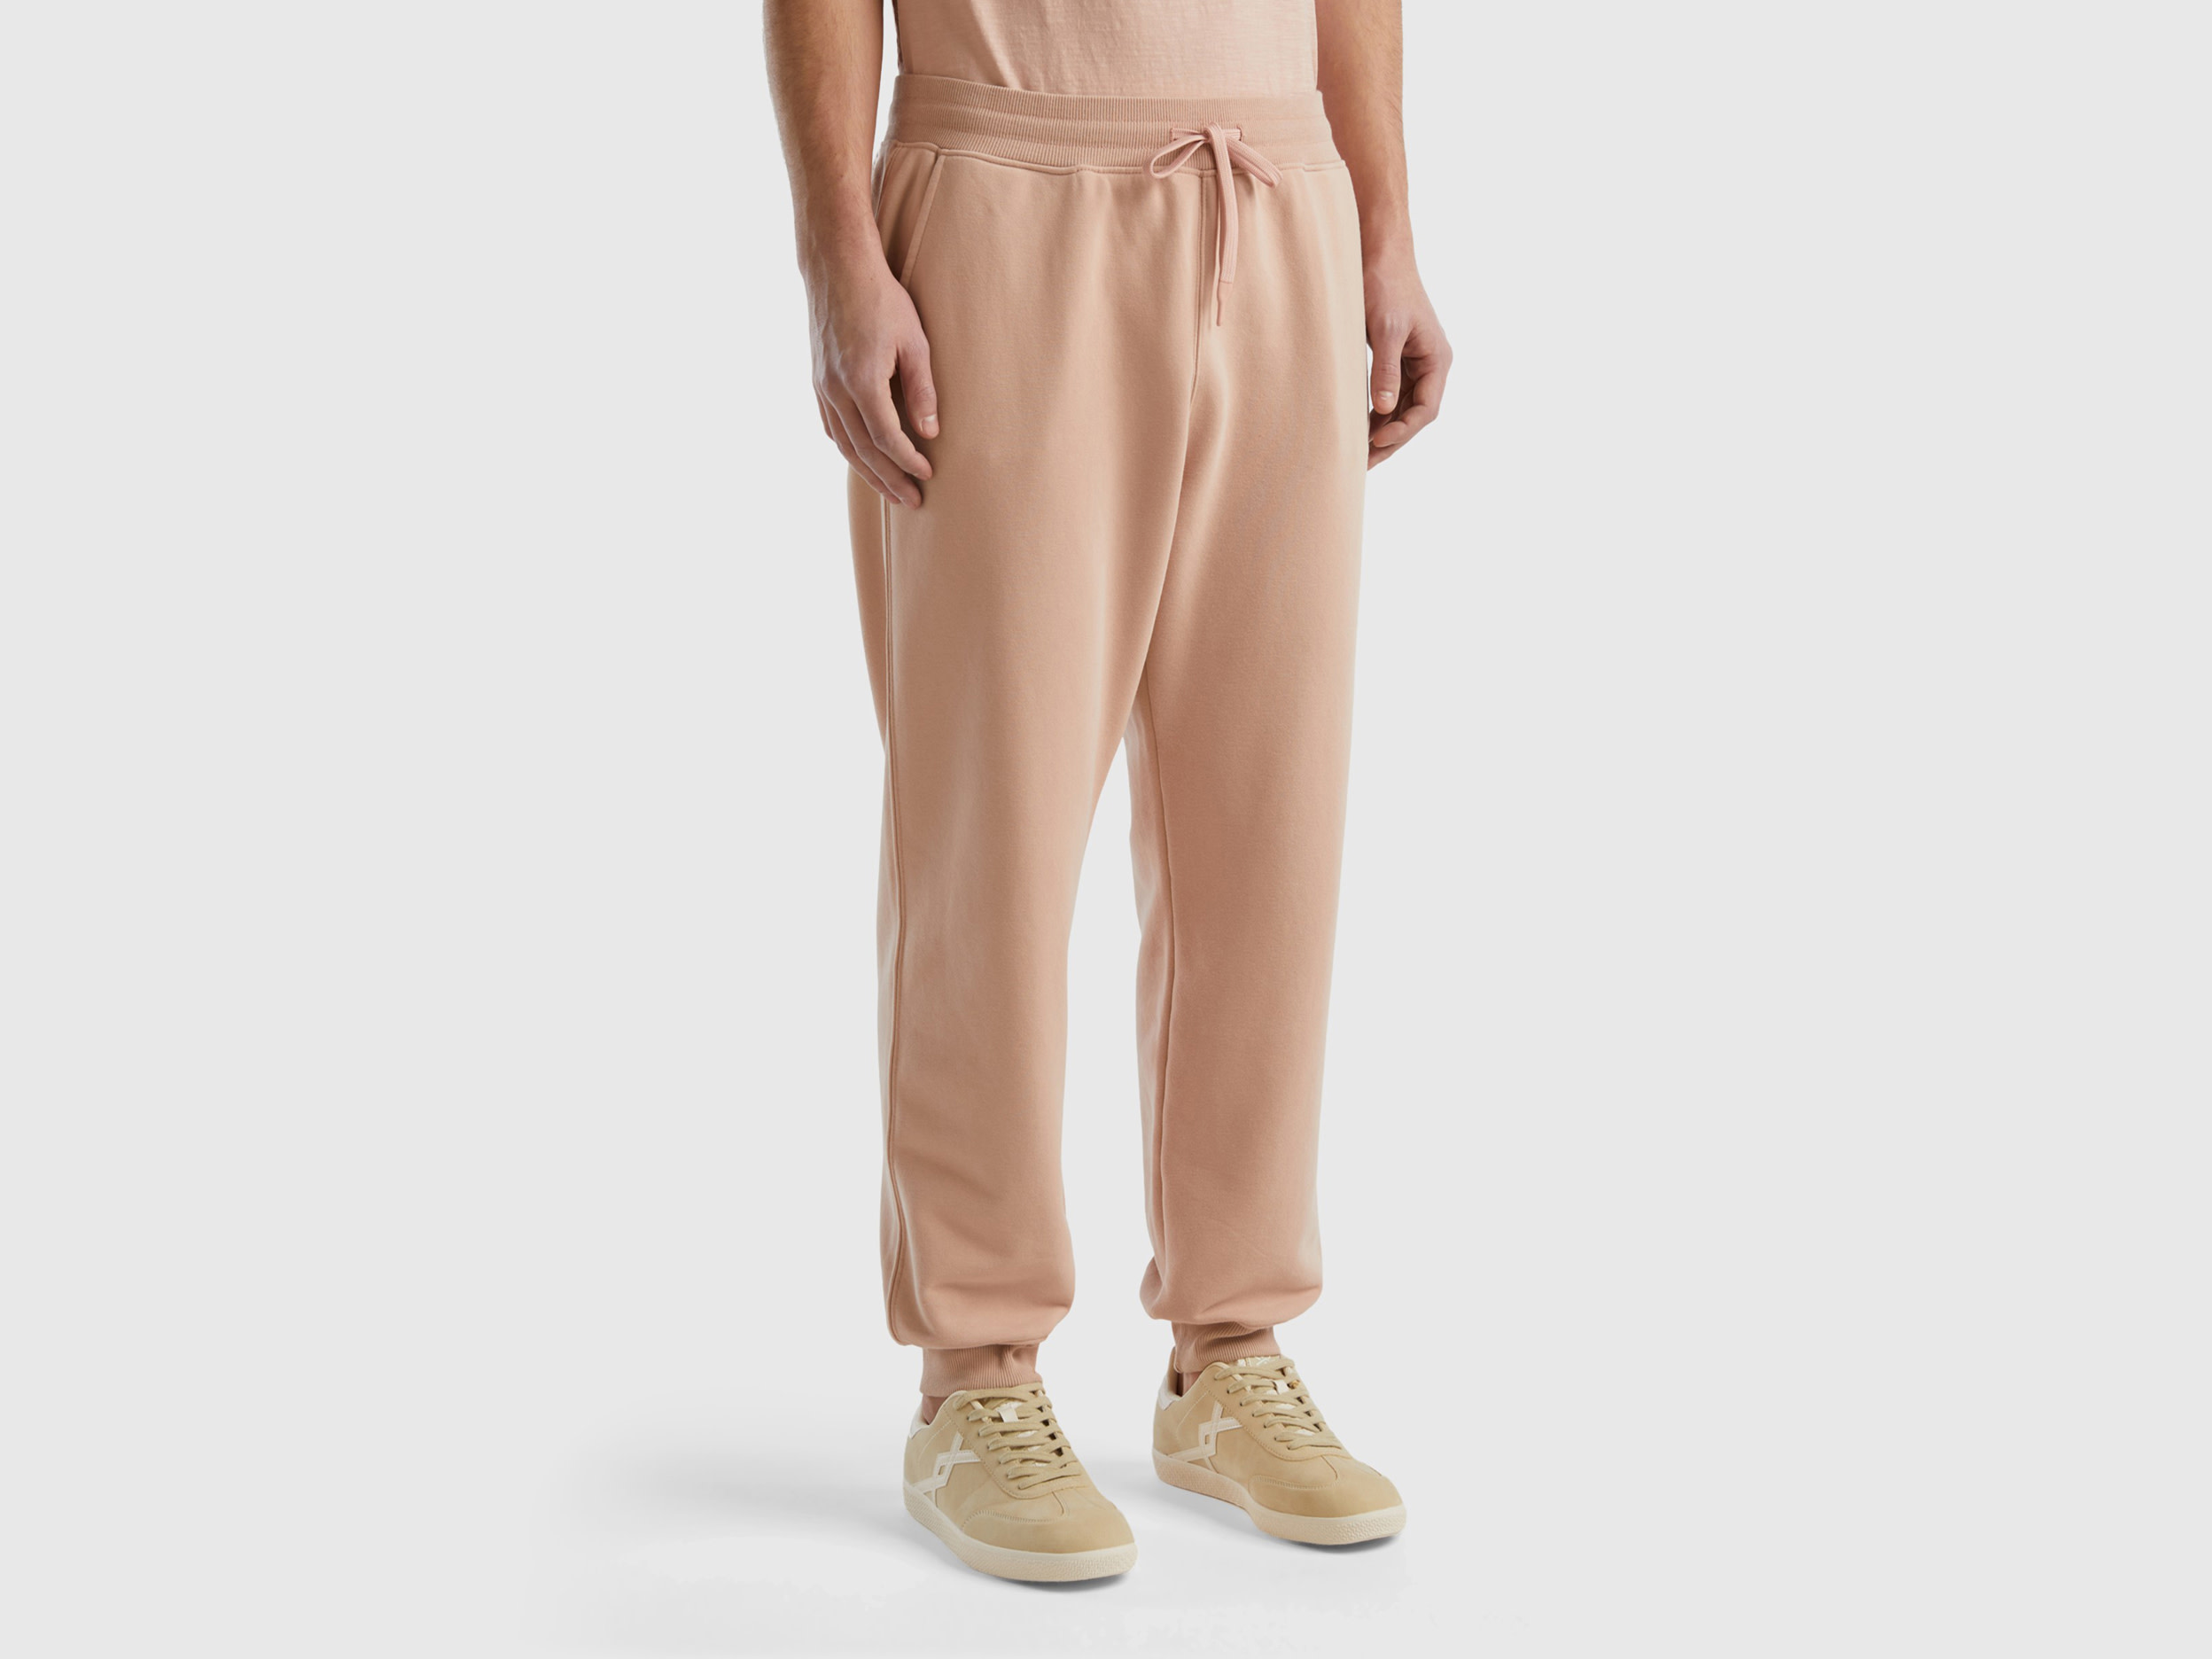 Image of Benetton, Joggers In Organic Cotton Blend, size S, Nude, Men